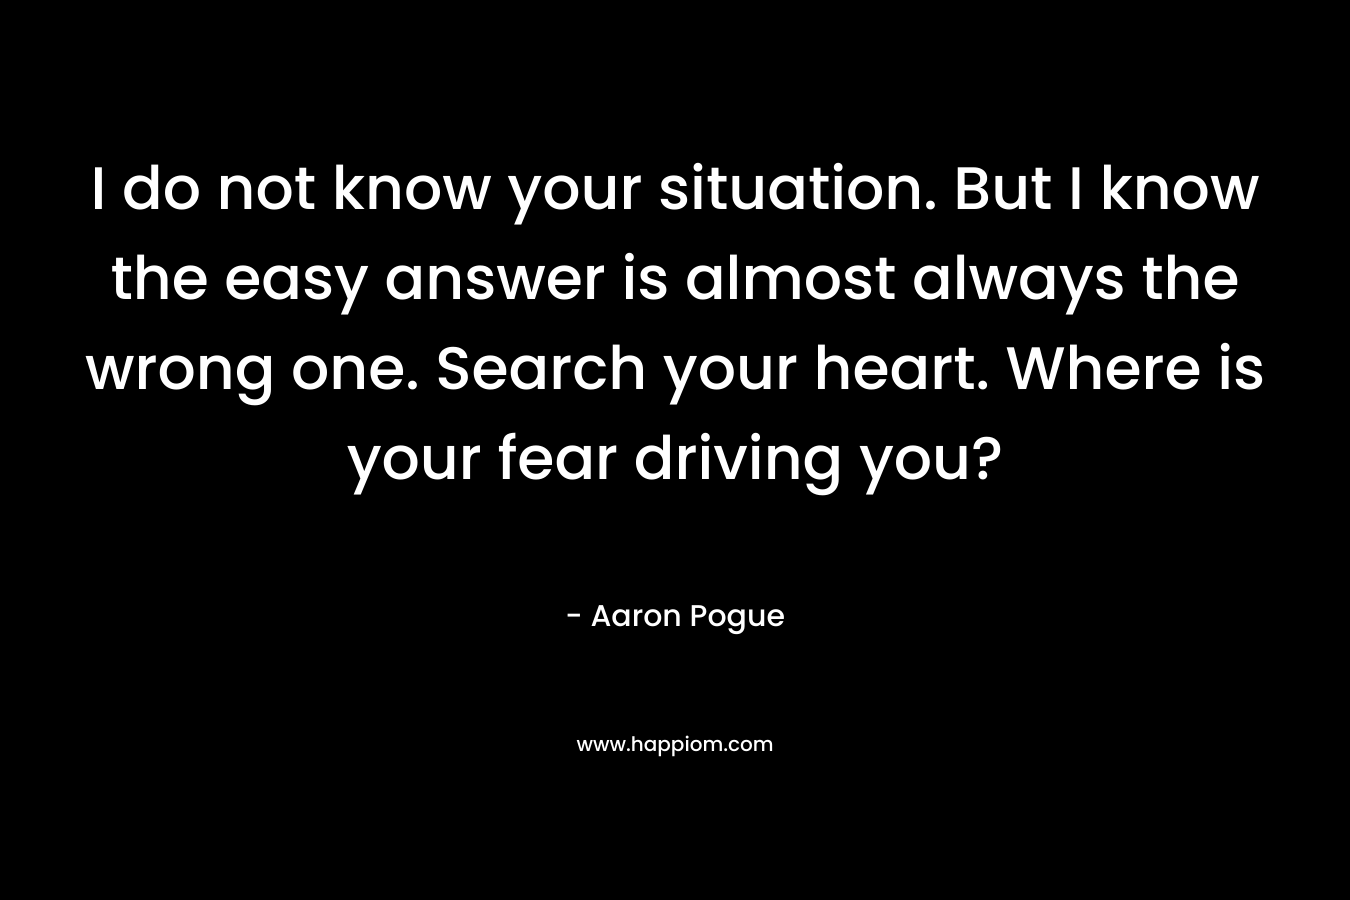 I do not know your situation. But I know the easy answer is almost always the wrong one. Search your heart. Where is your fear driving you? – Aaron Pogue